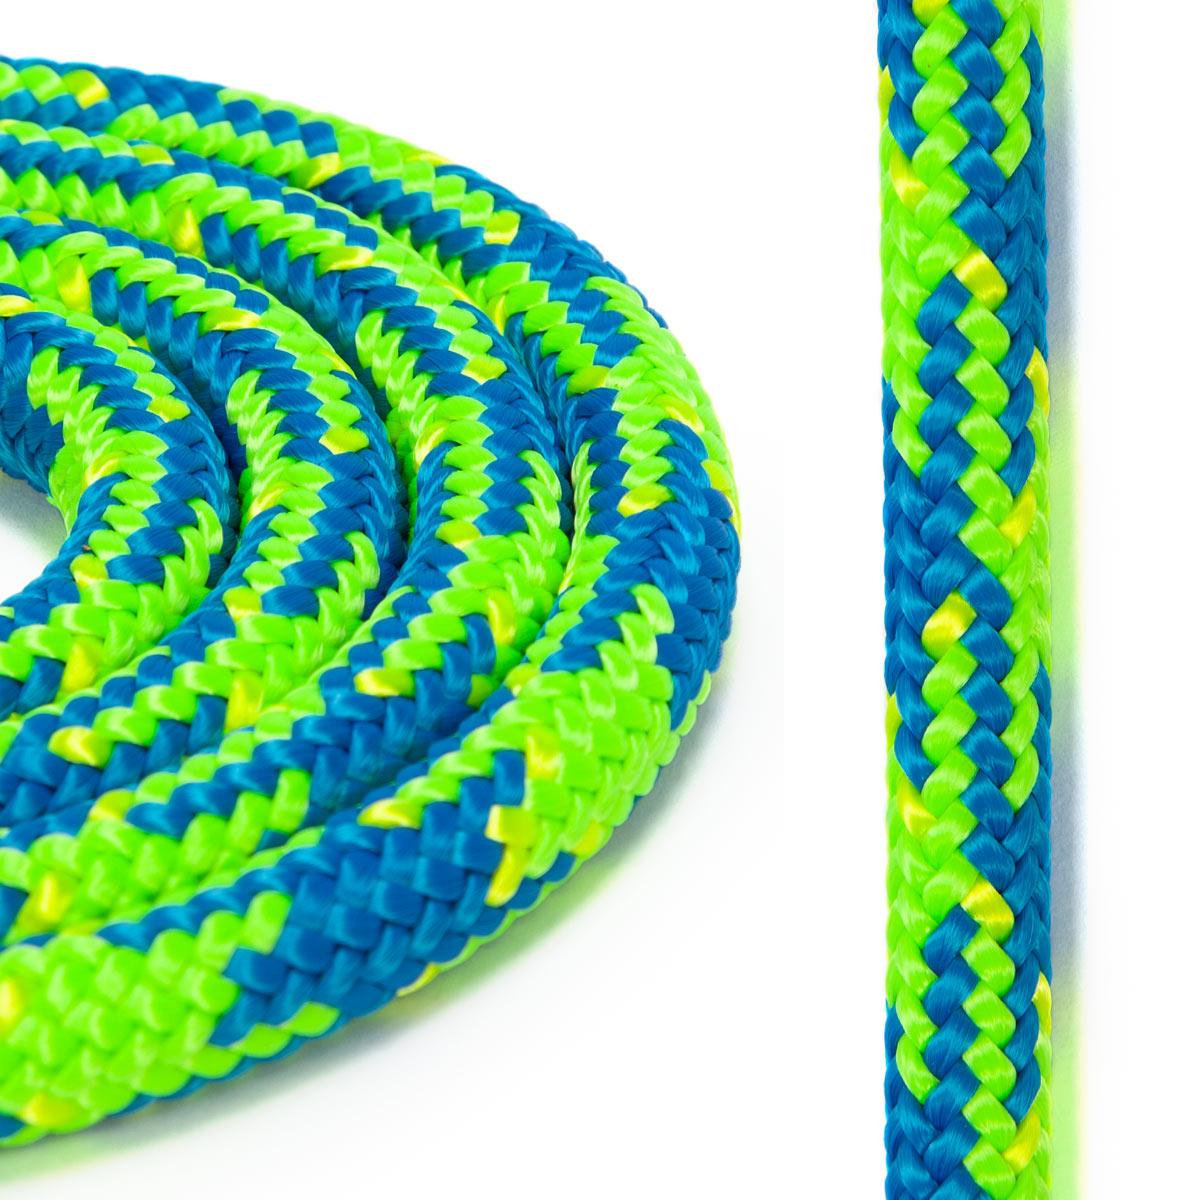 Blue Craze 24-Strand Braided Polyester ropes - Lowest prices, free